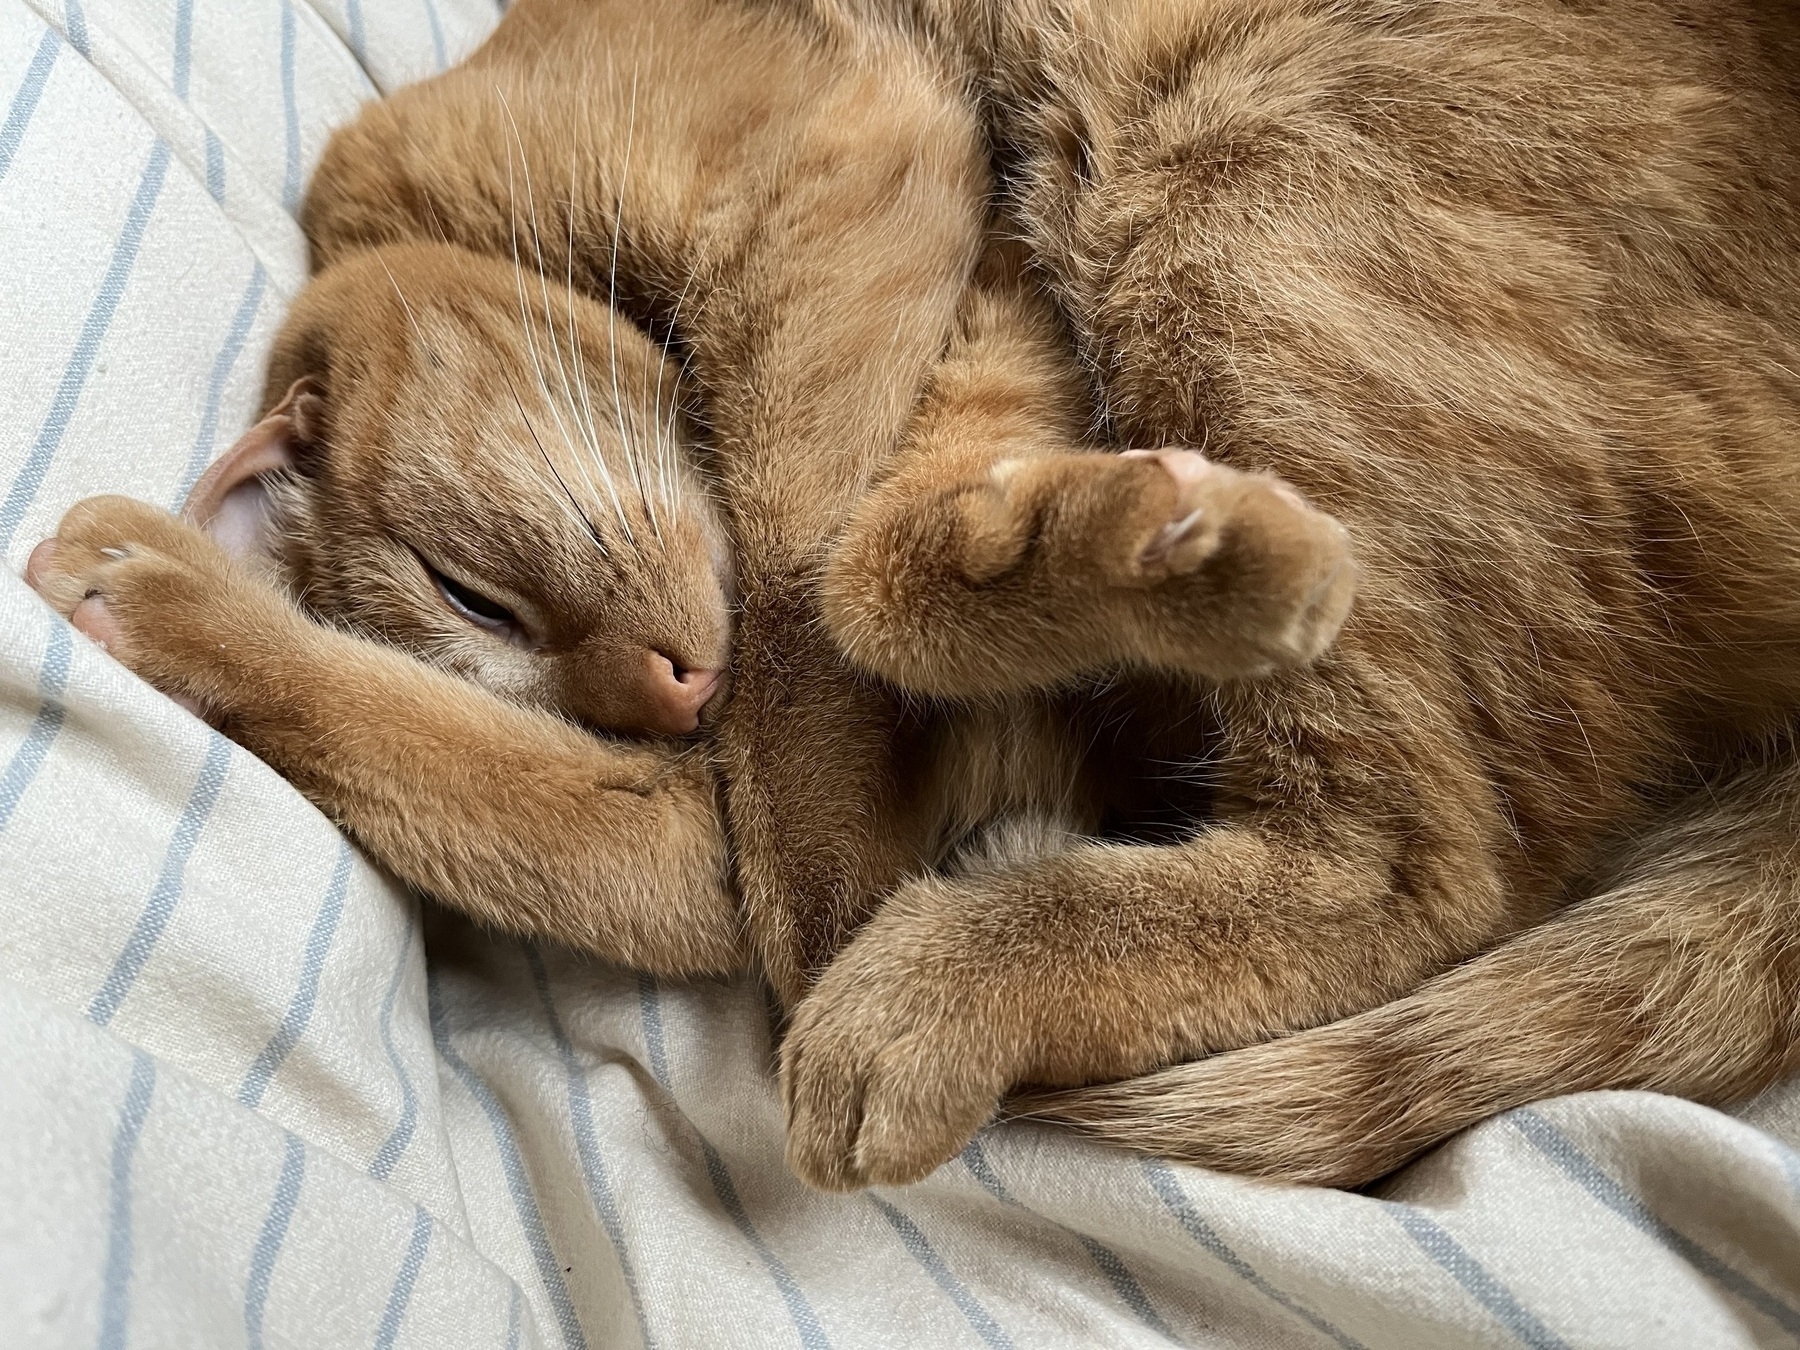 Cat curled up on a comforter 